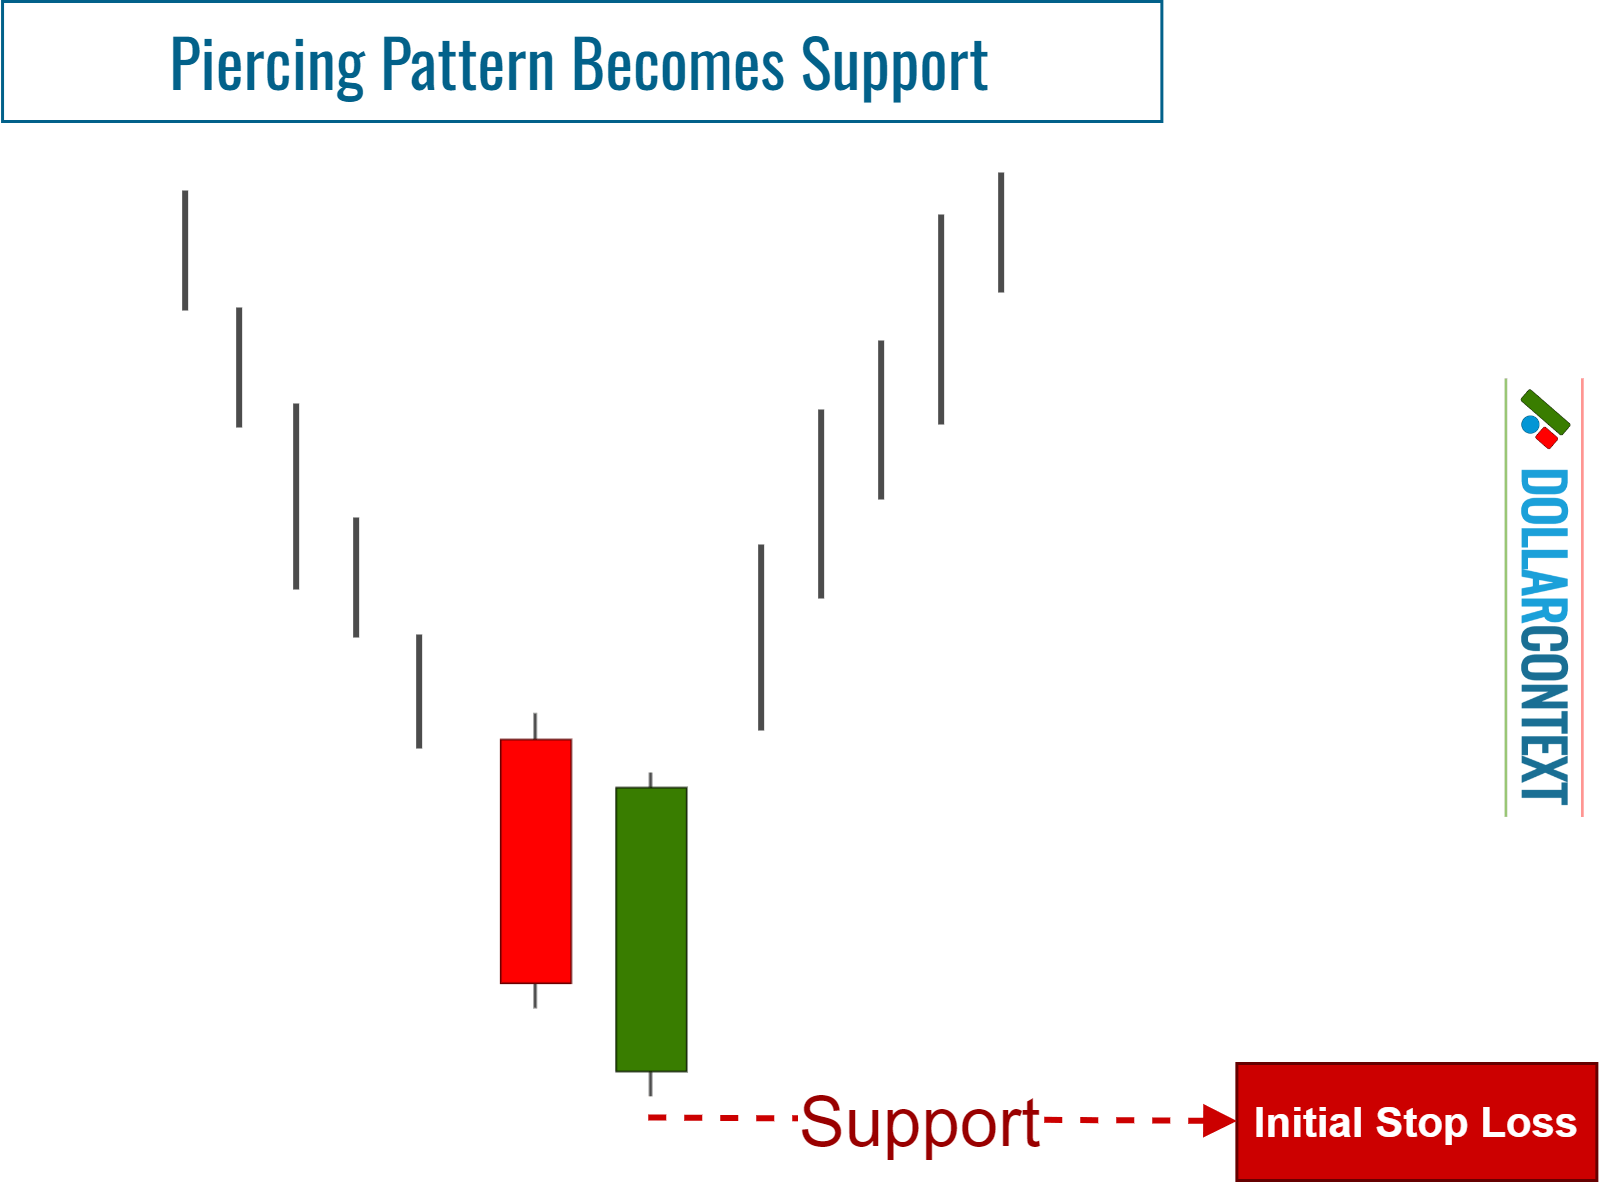 The Lows of a Piercing Pattern Become Support